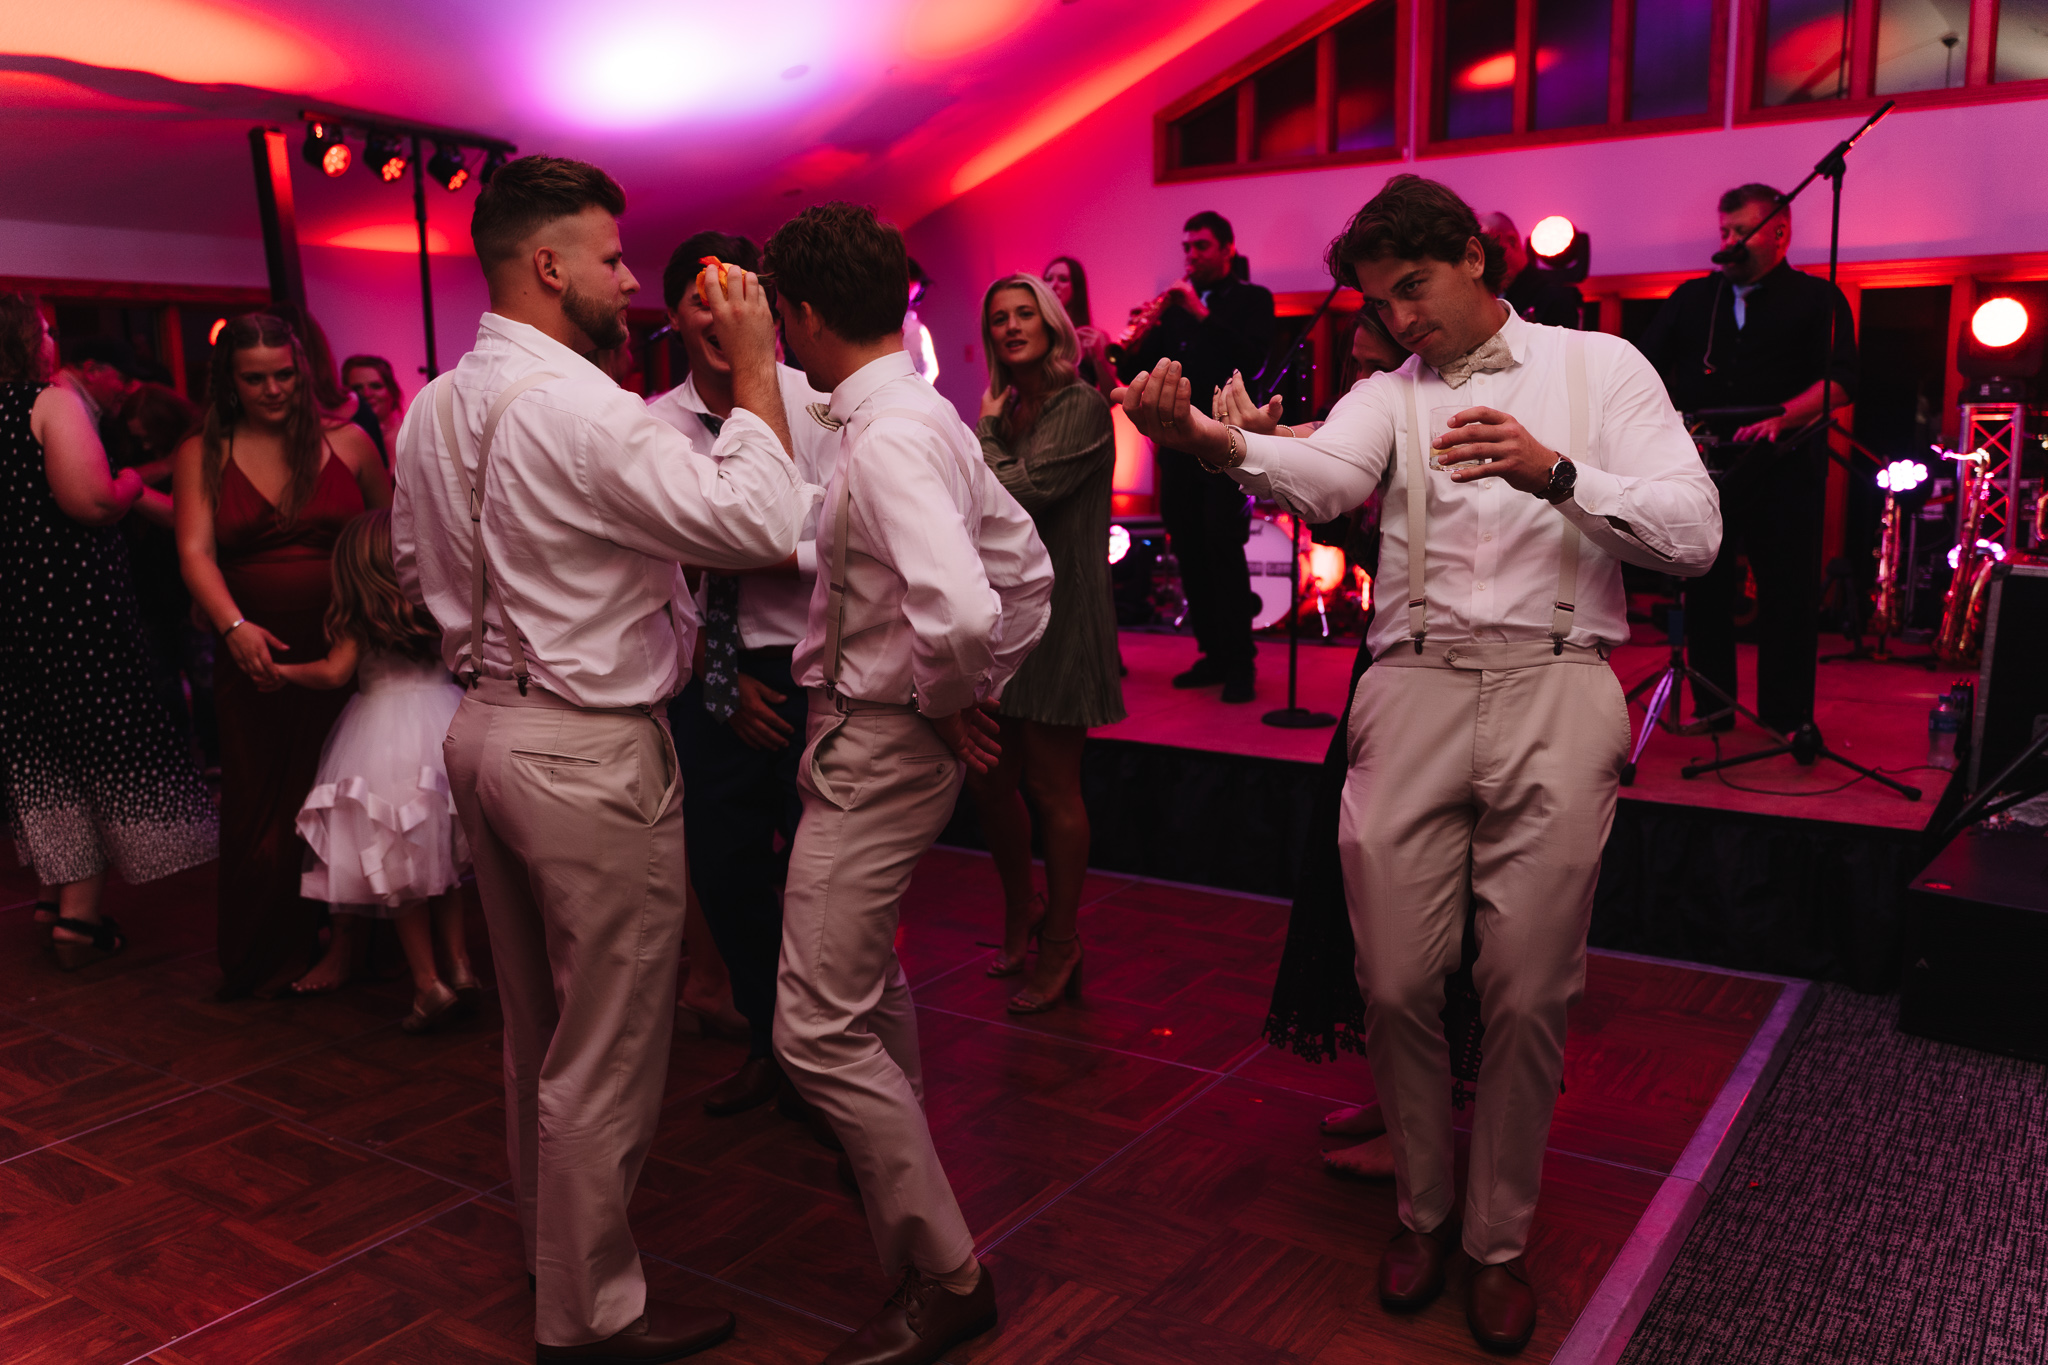 Four men in semi-formal attire dancing energetically with each other on a dance floor at a lively evening event, with other guests and a live band in the background at a wedding in Minnesota